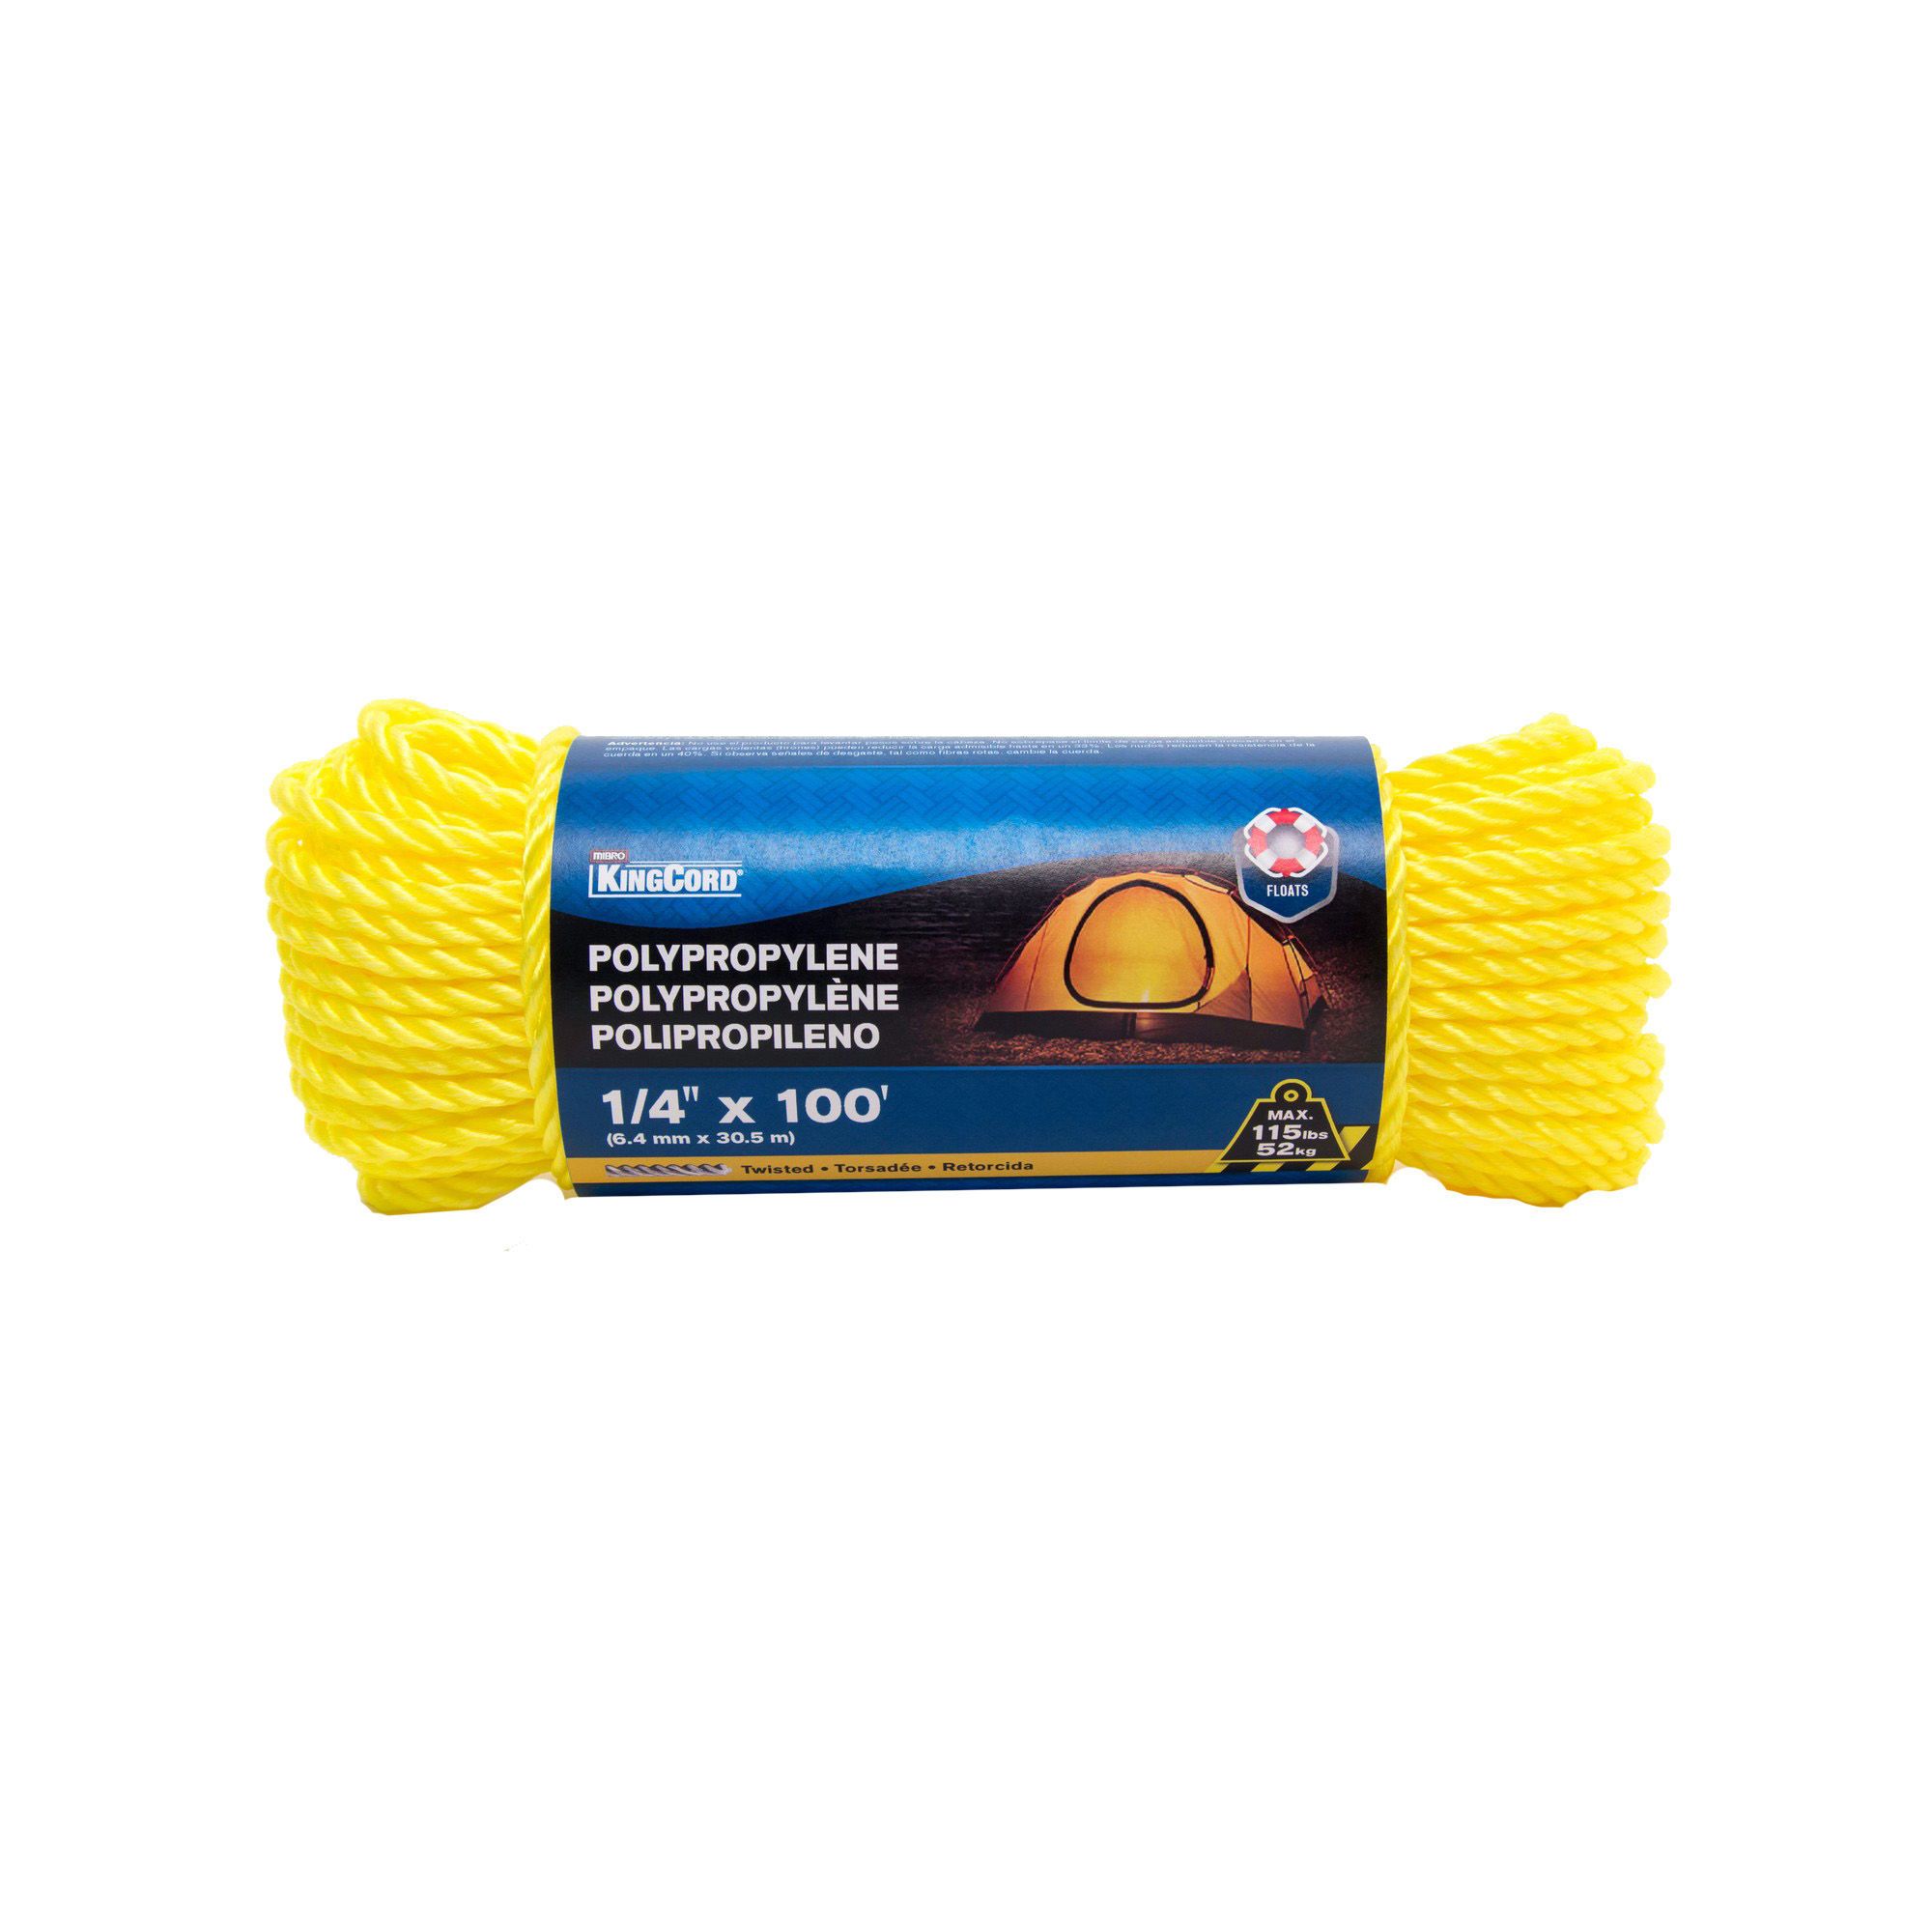 Twisted Polypropylene Rope - Yellow - 1/4 x 100' from KINGCORD